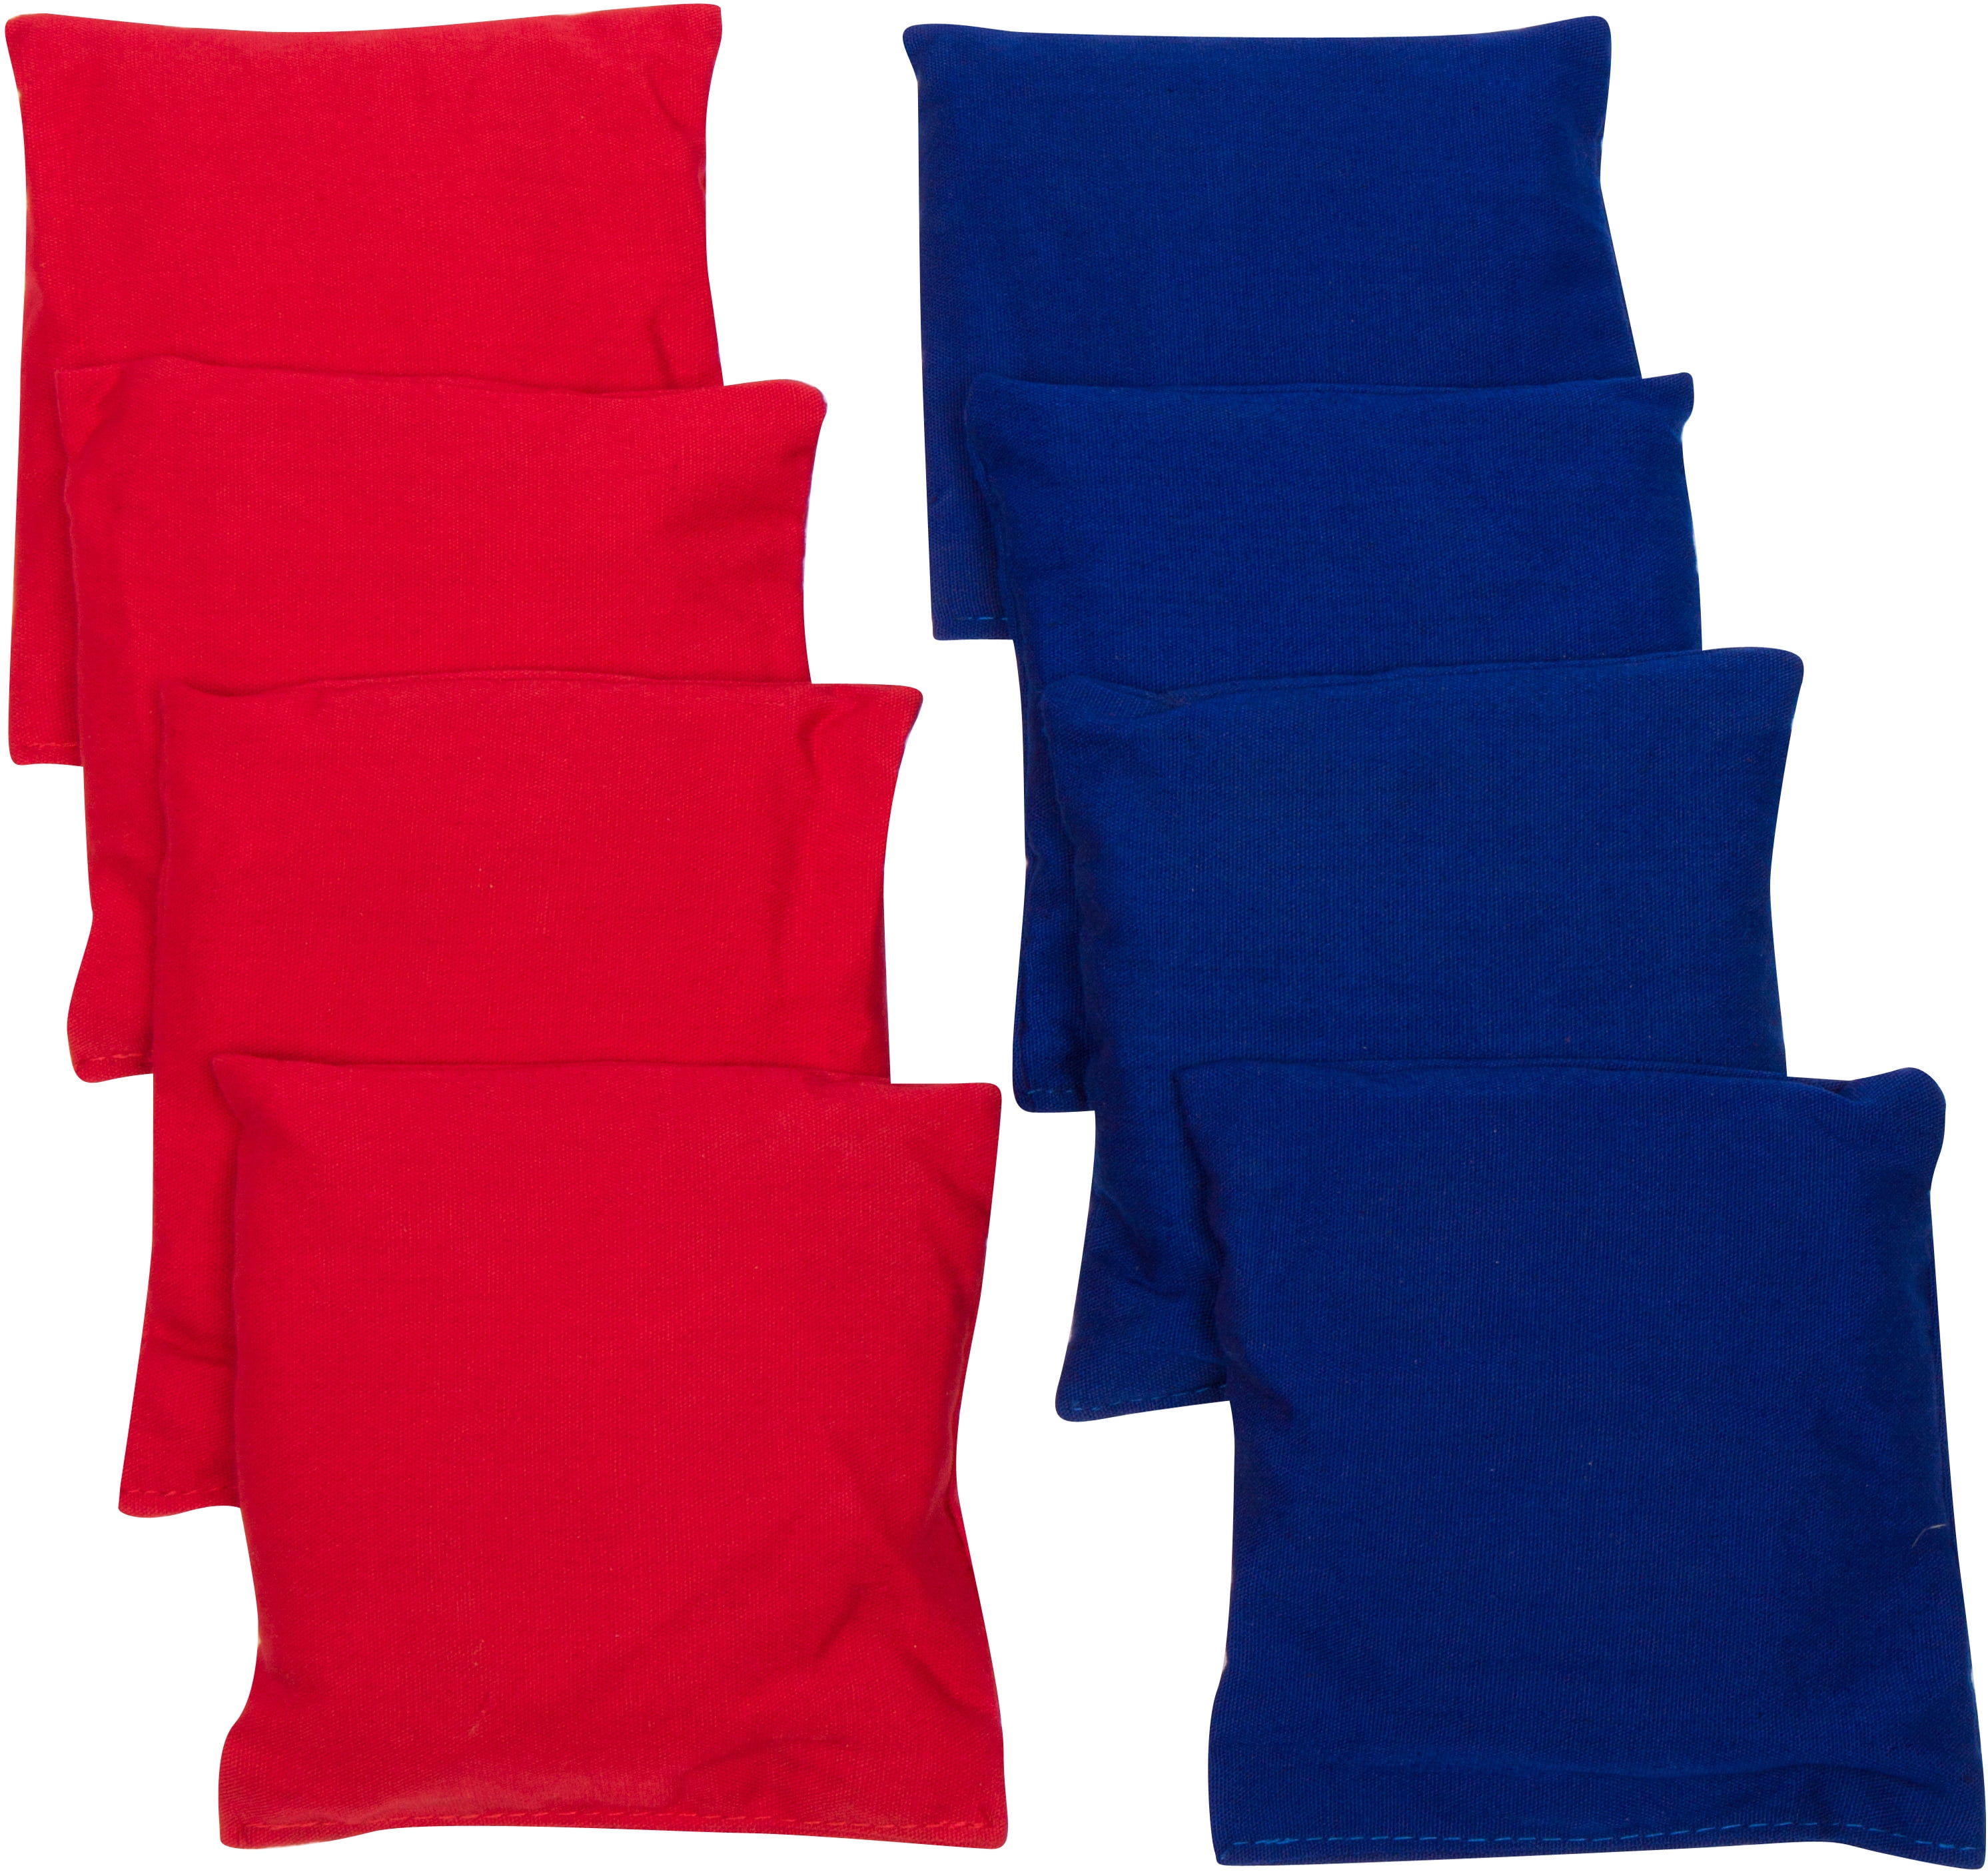 8 Water Resistant Cornhole Bean Bags Set Tailgate Toss  Red and Royal Blue 